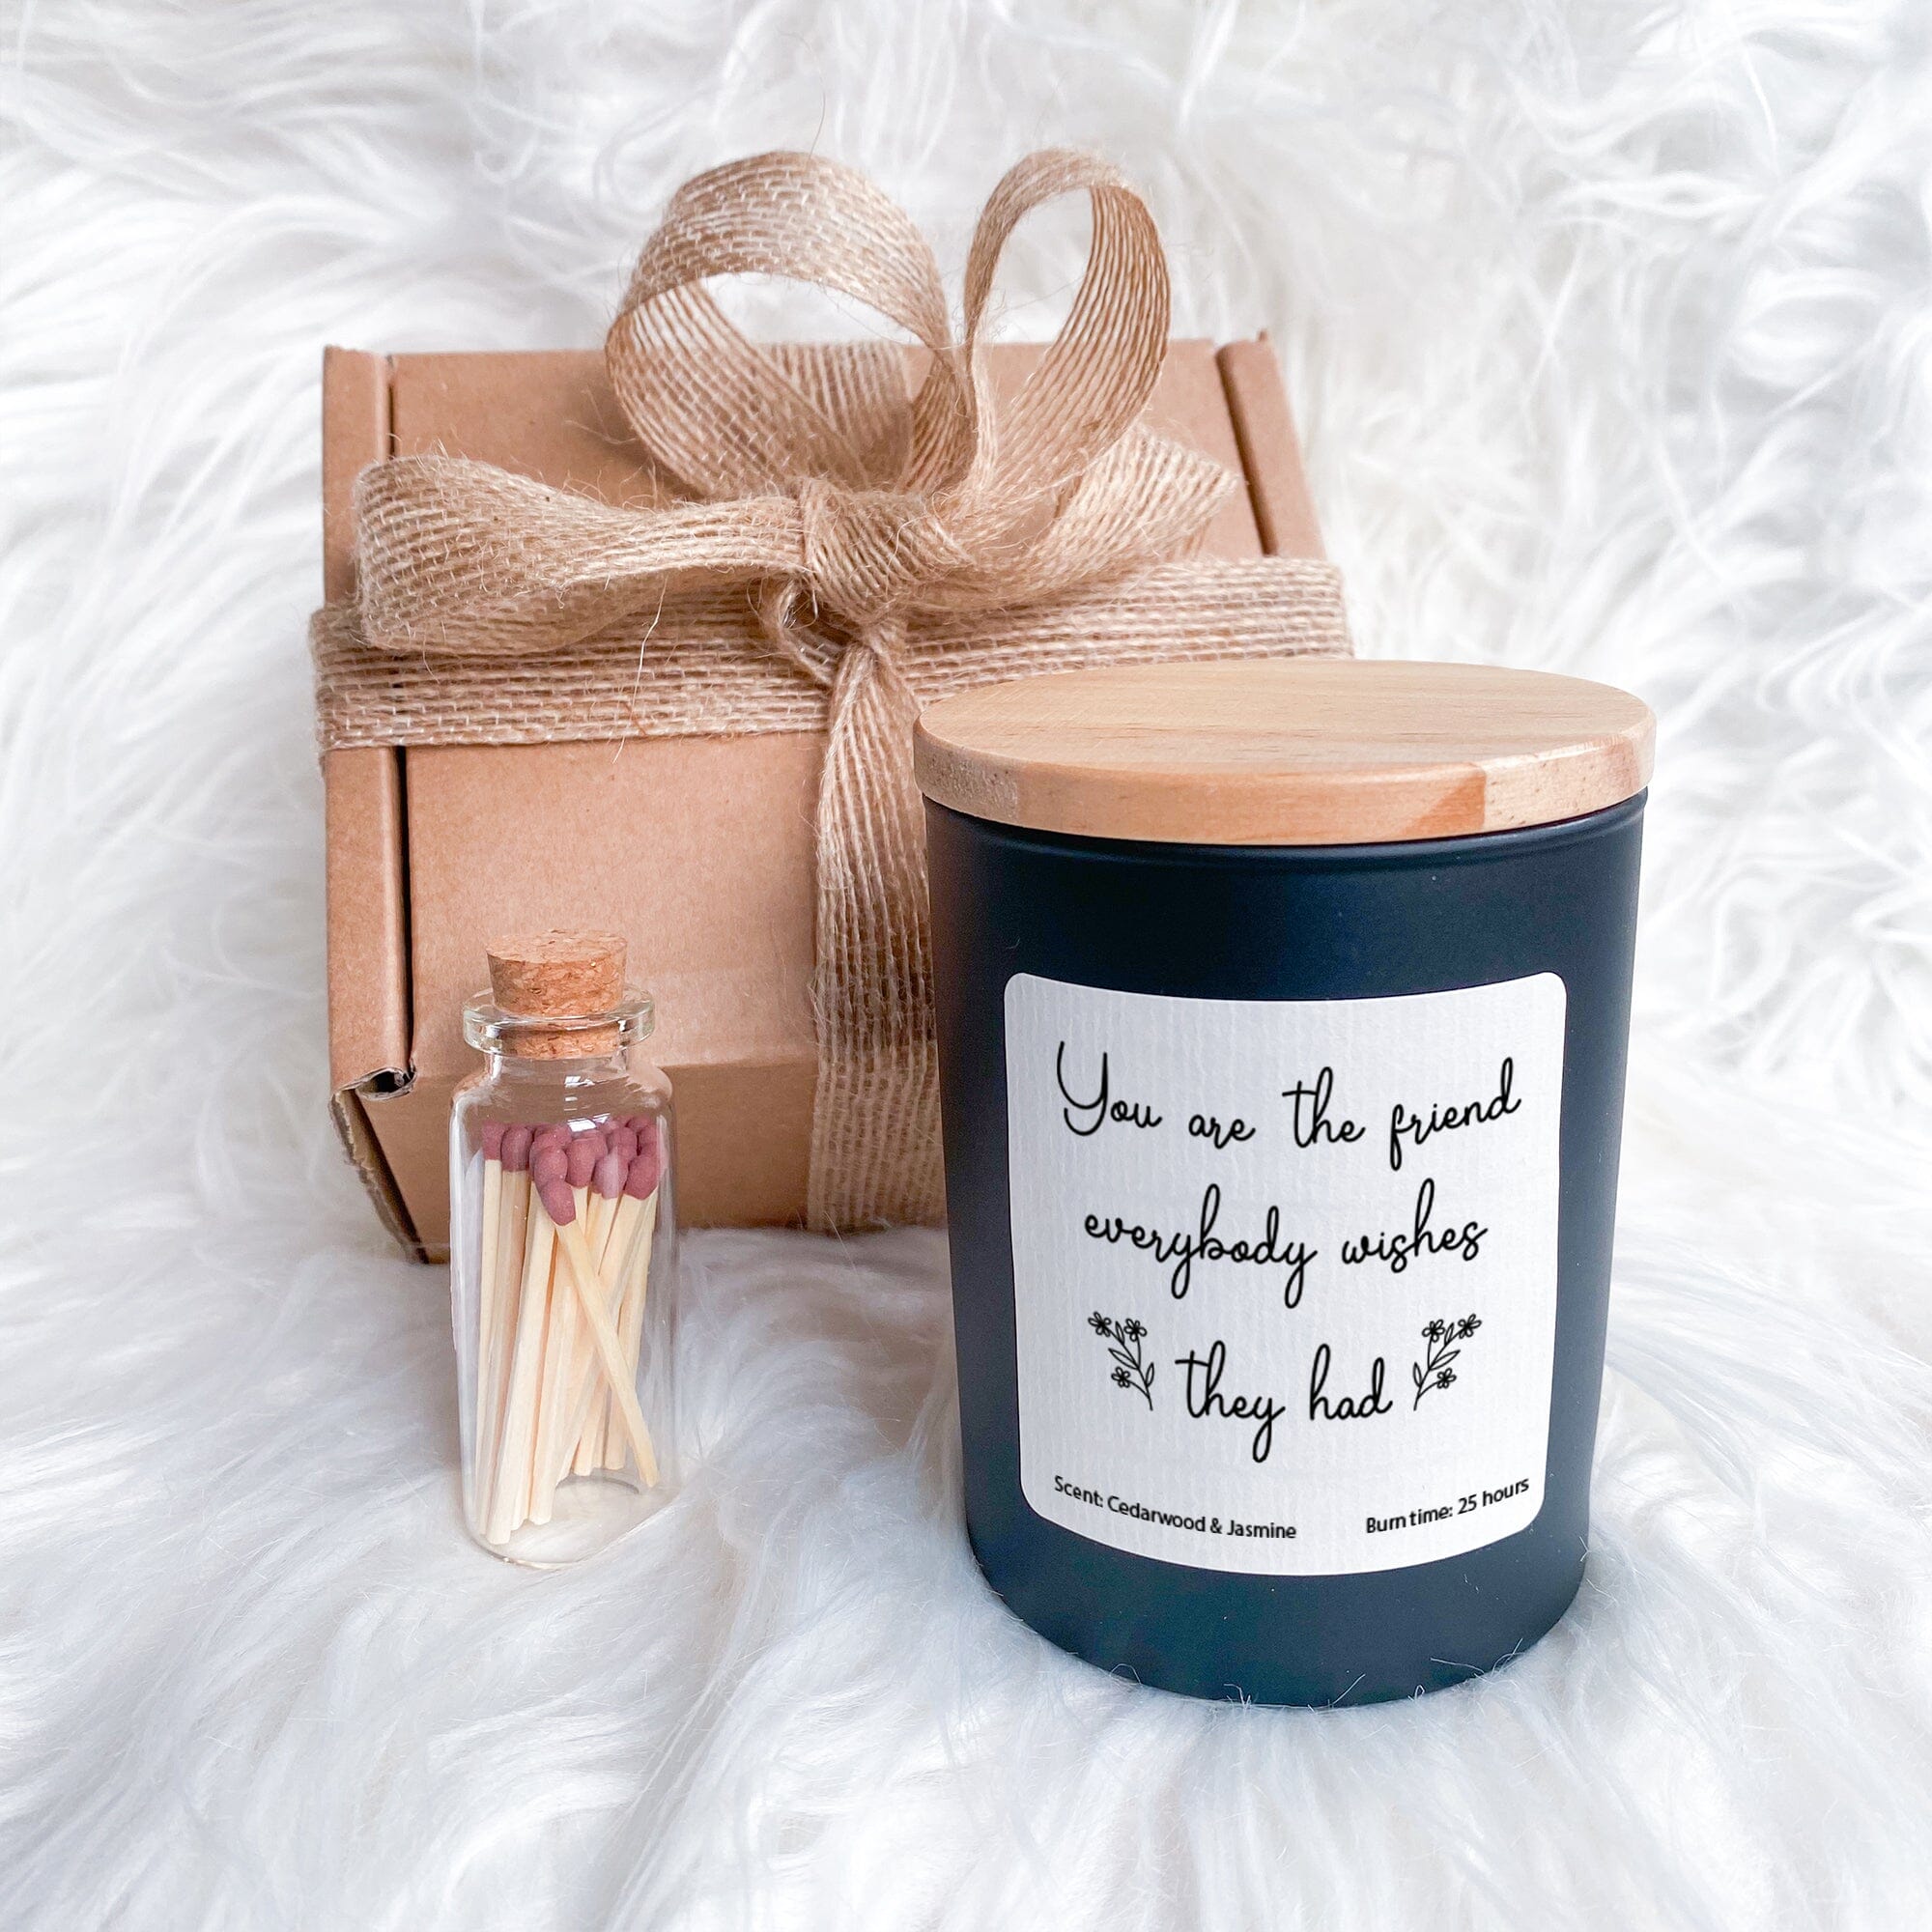 Candle for friend, You are the friend everybody wishes they had, Birthday gift for best friends